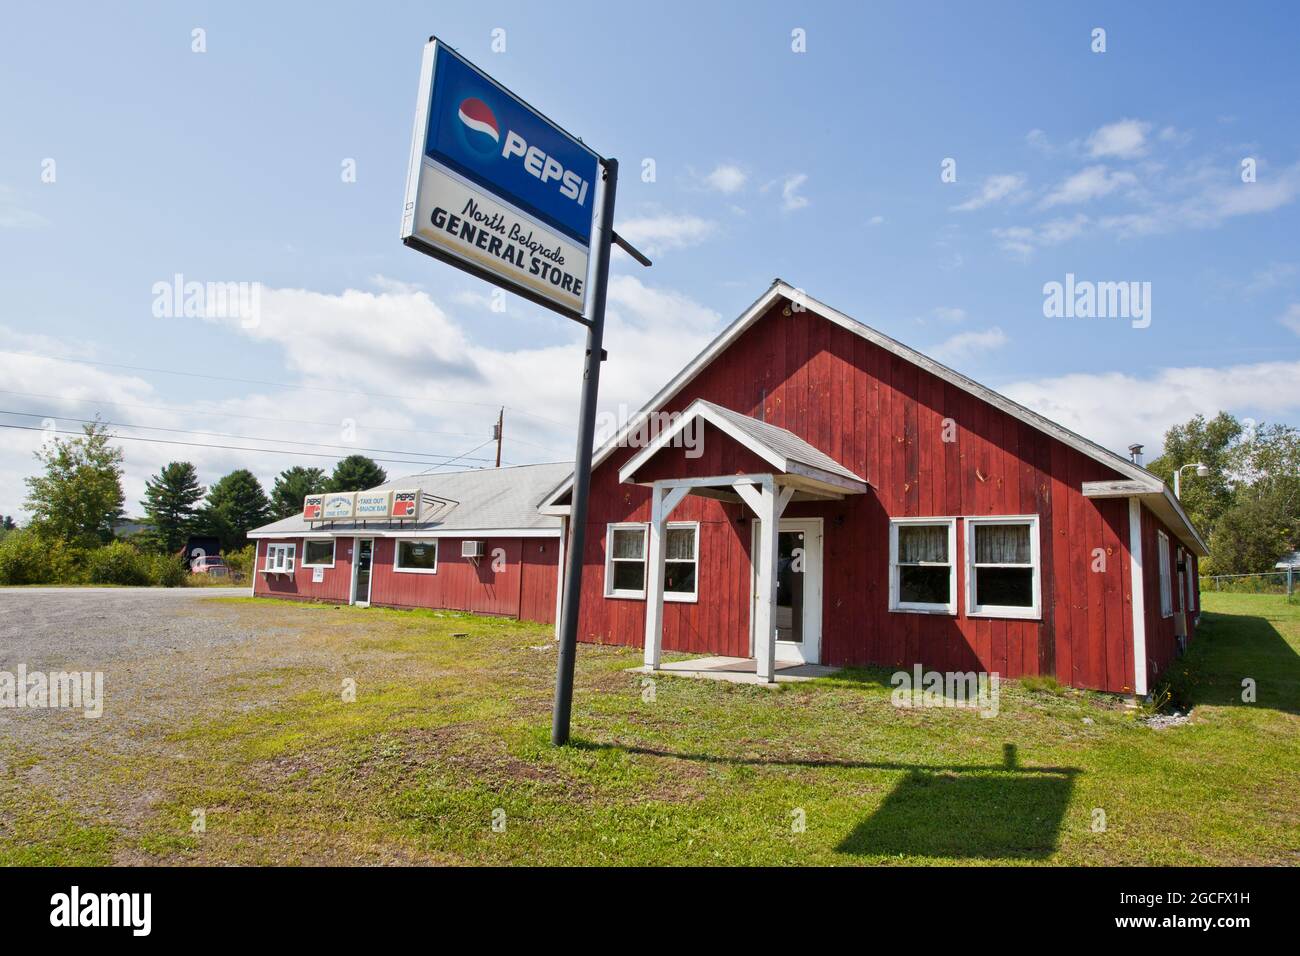 A closed store in Maine Stock Photo